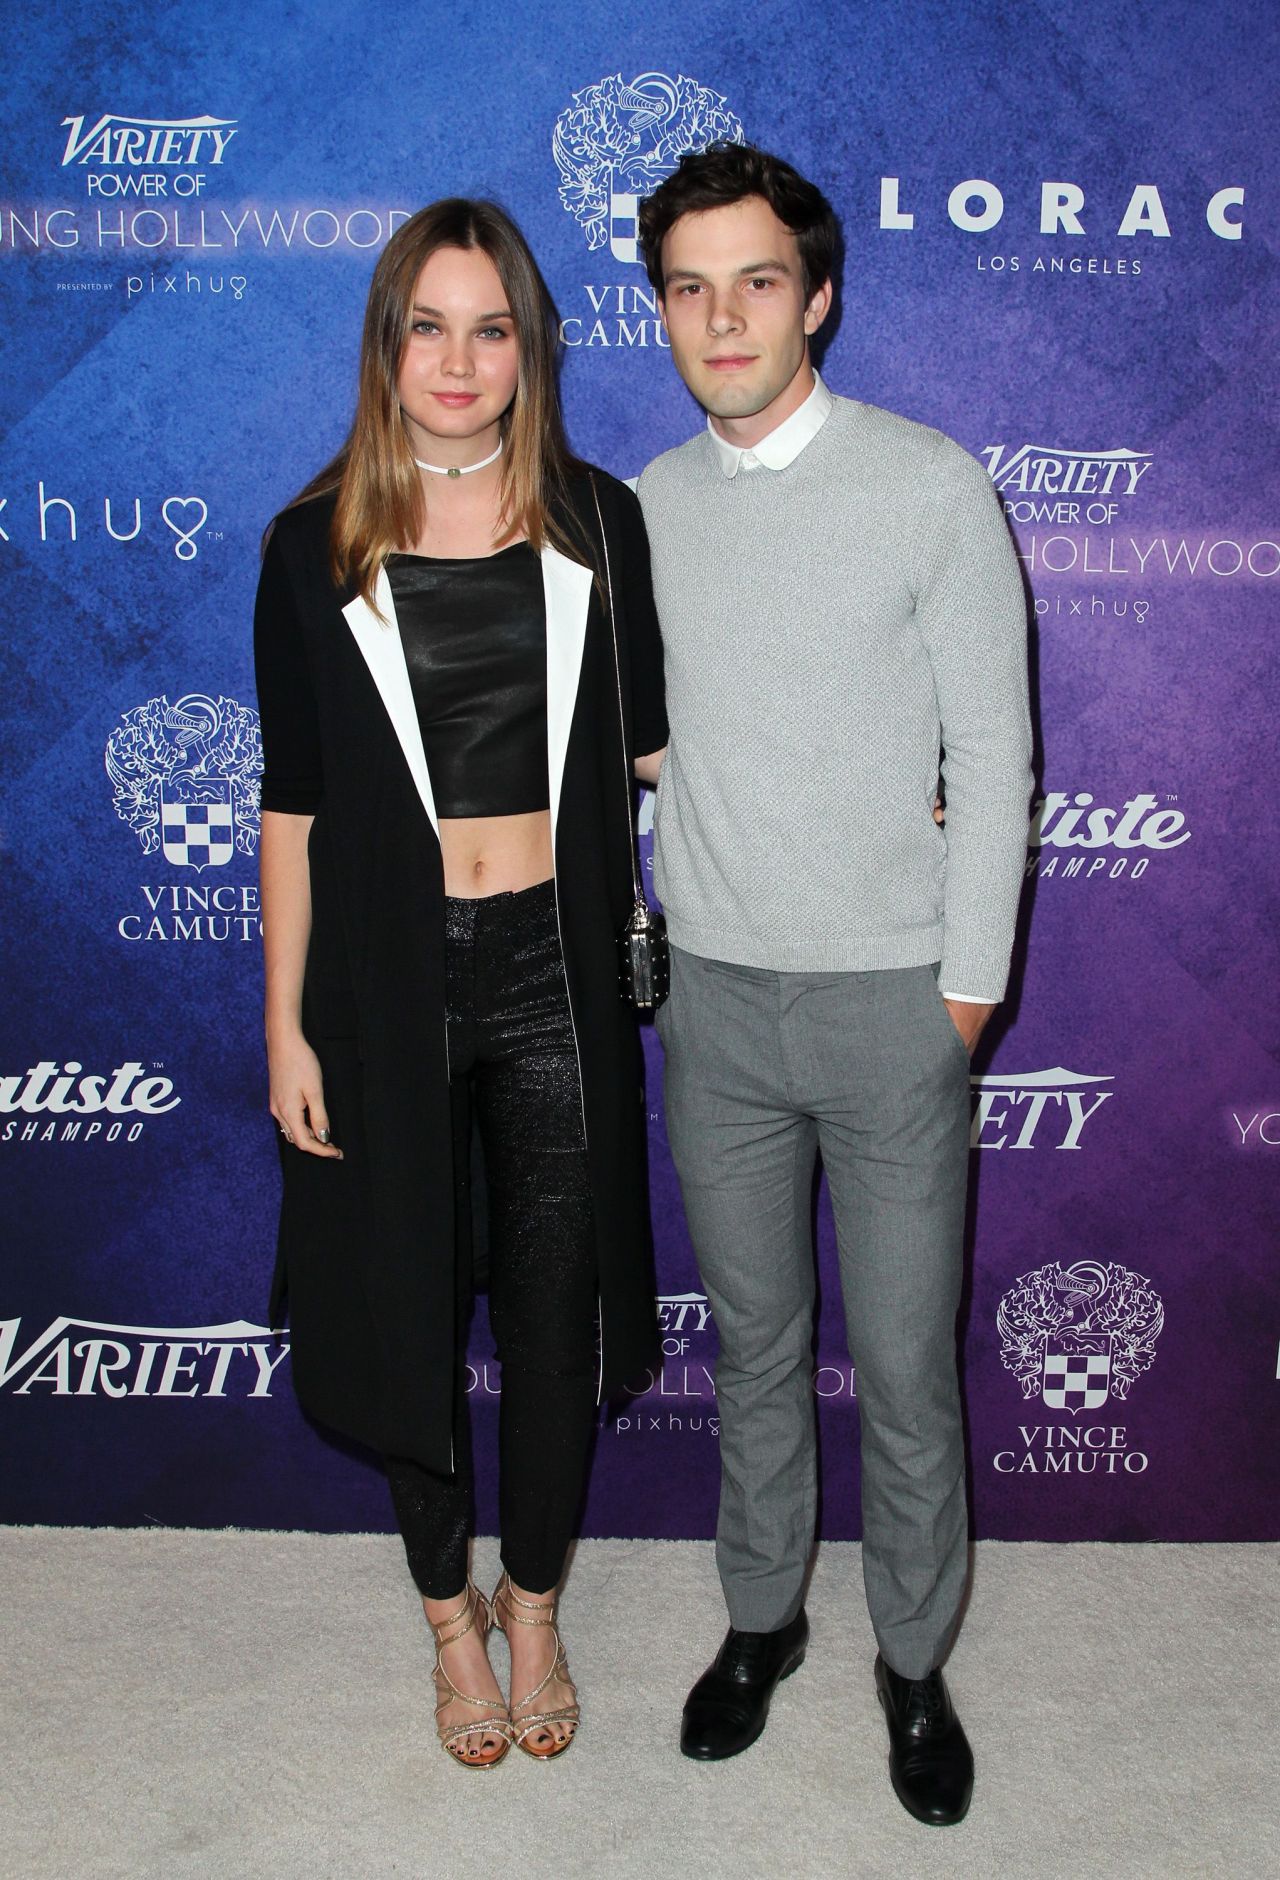 Liana Liberato attends Varietys Power Of Young Hollywood